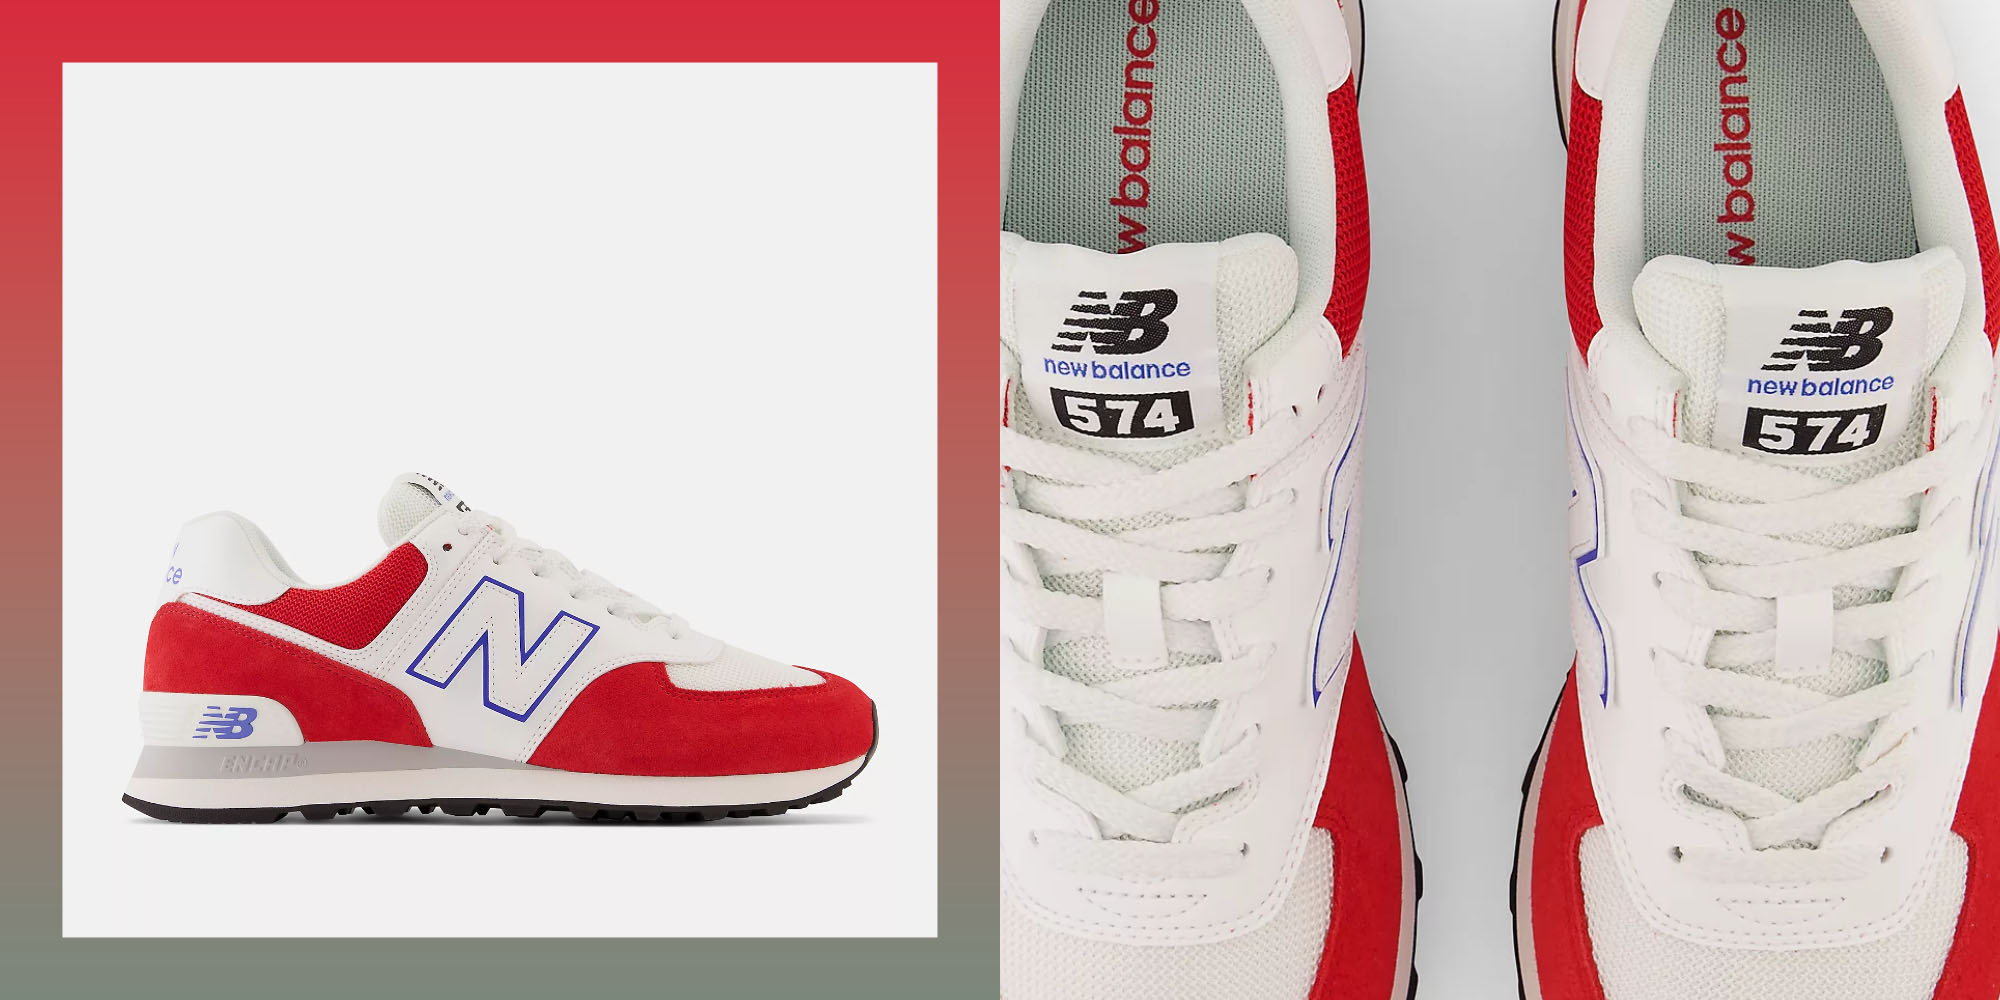 New Balance 574, Sneakers